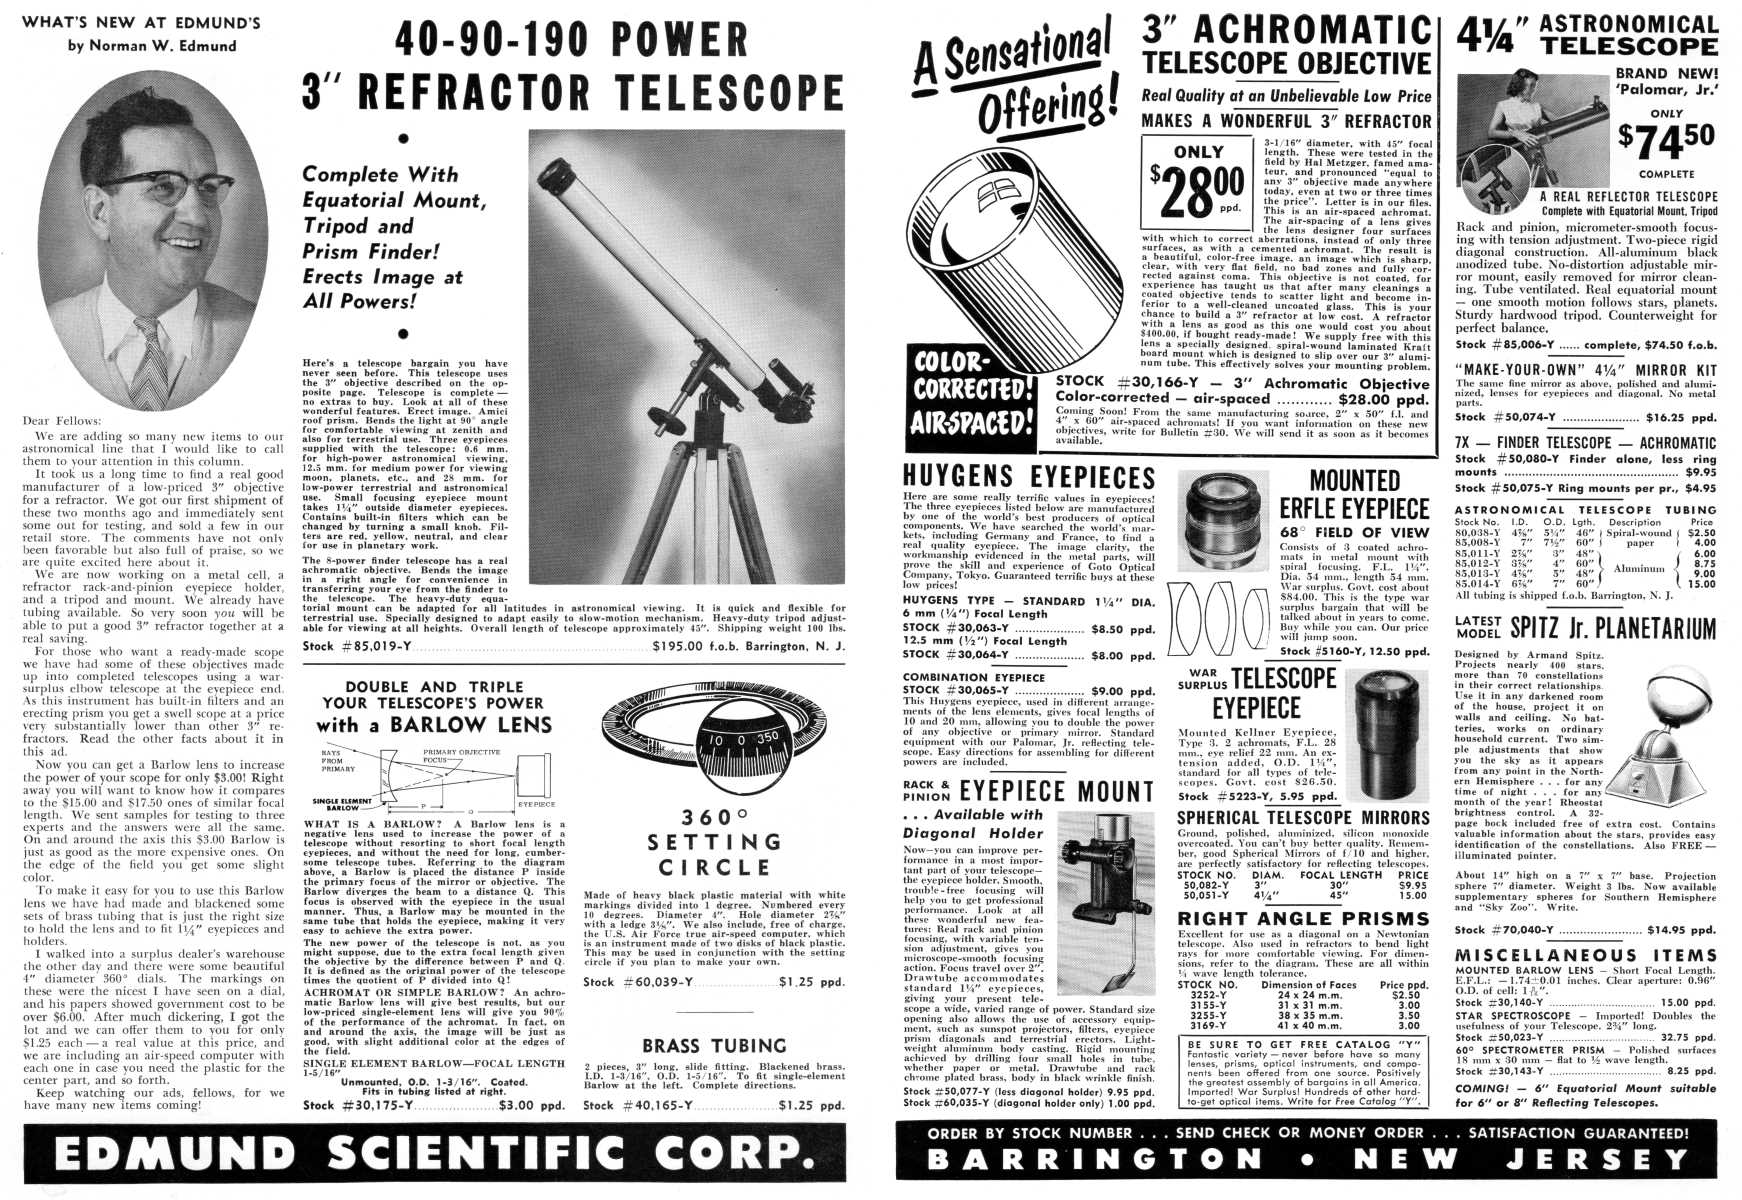 Edmund Scientific Corp. advertisement in the May 1955 issue of <em>Sky and Telescope</em>